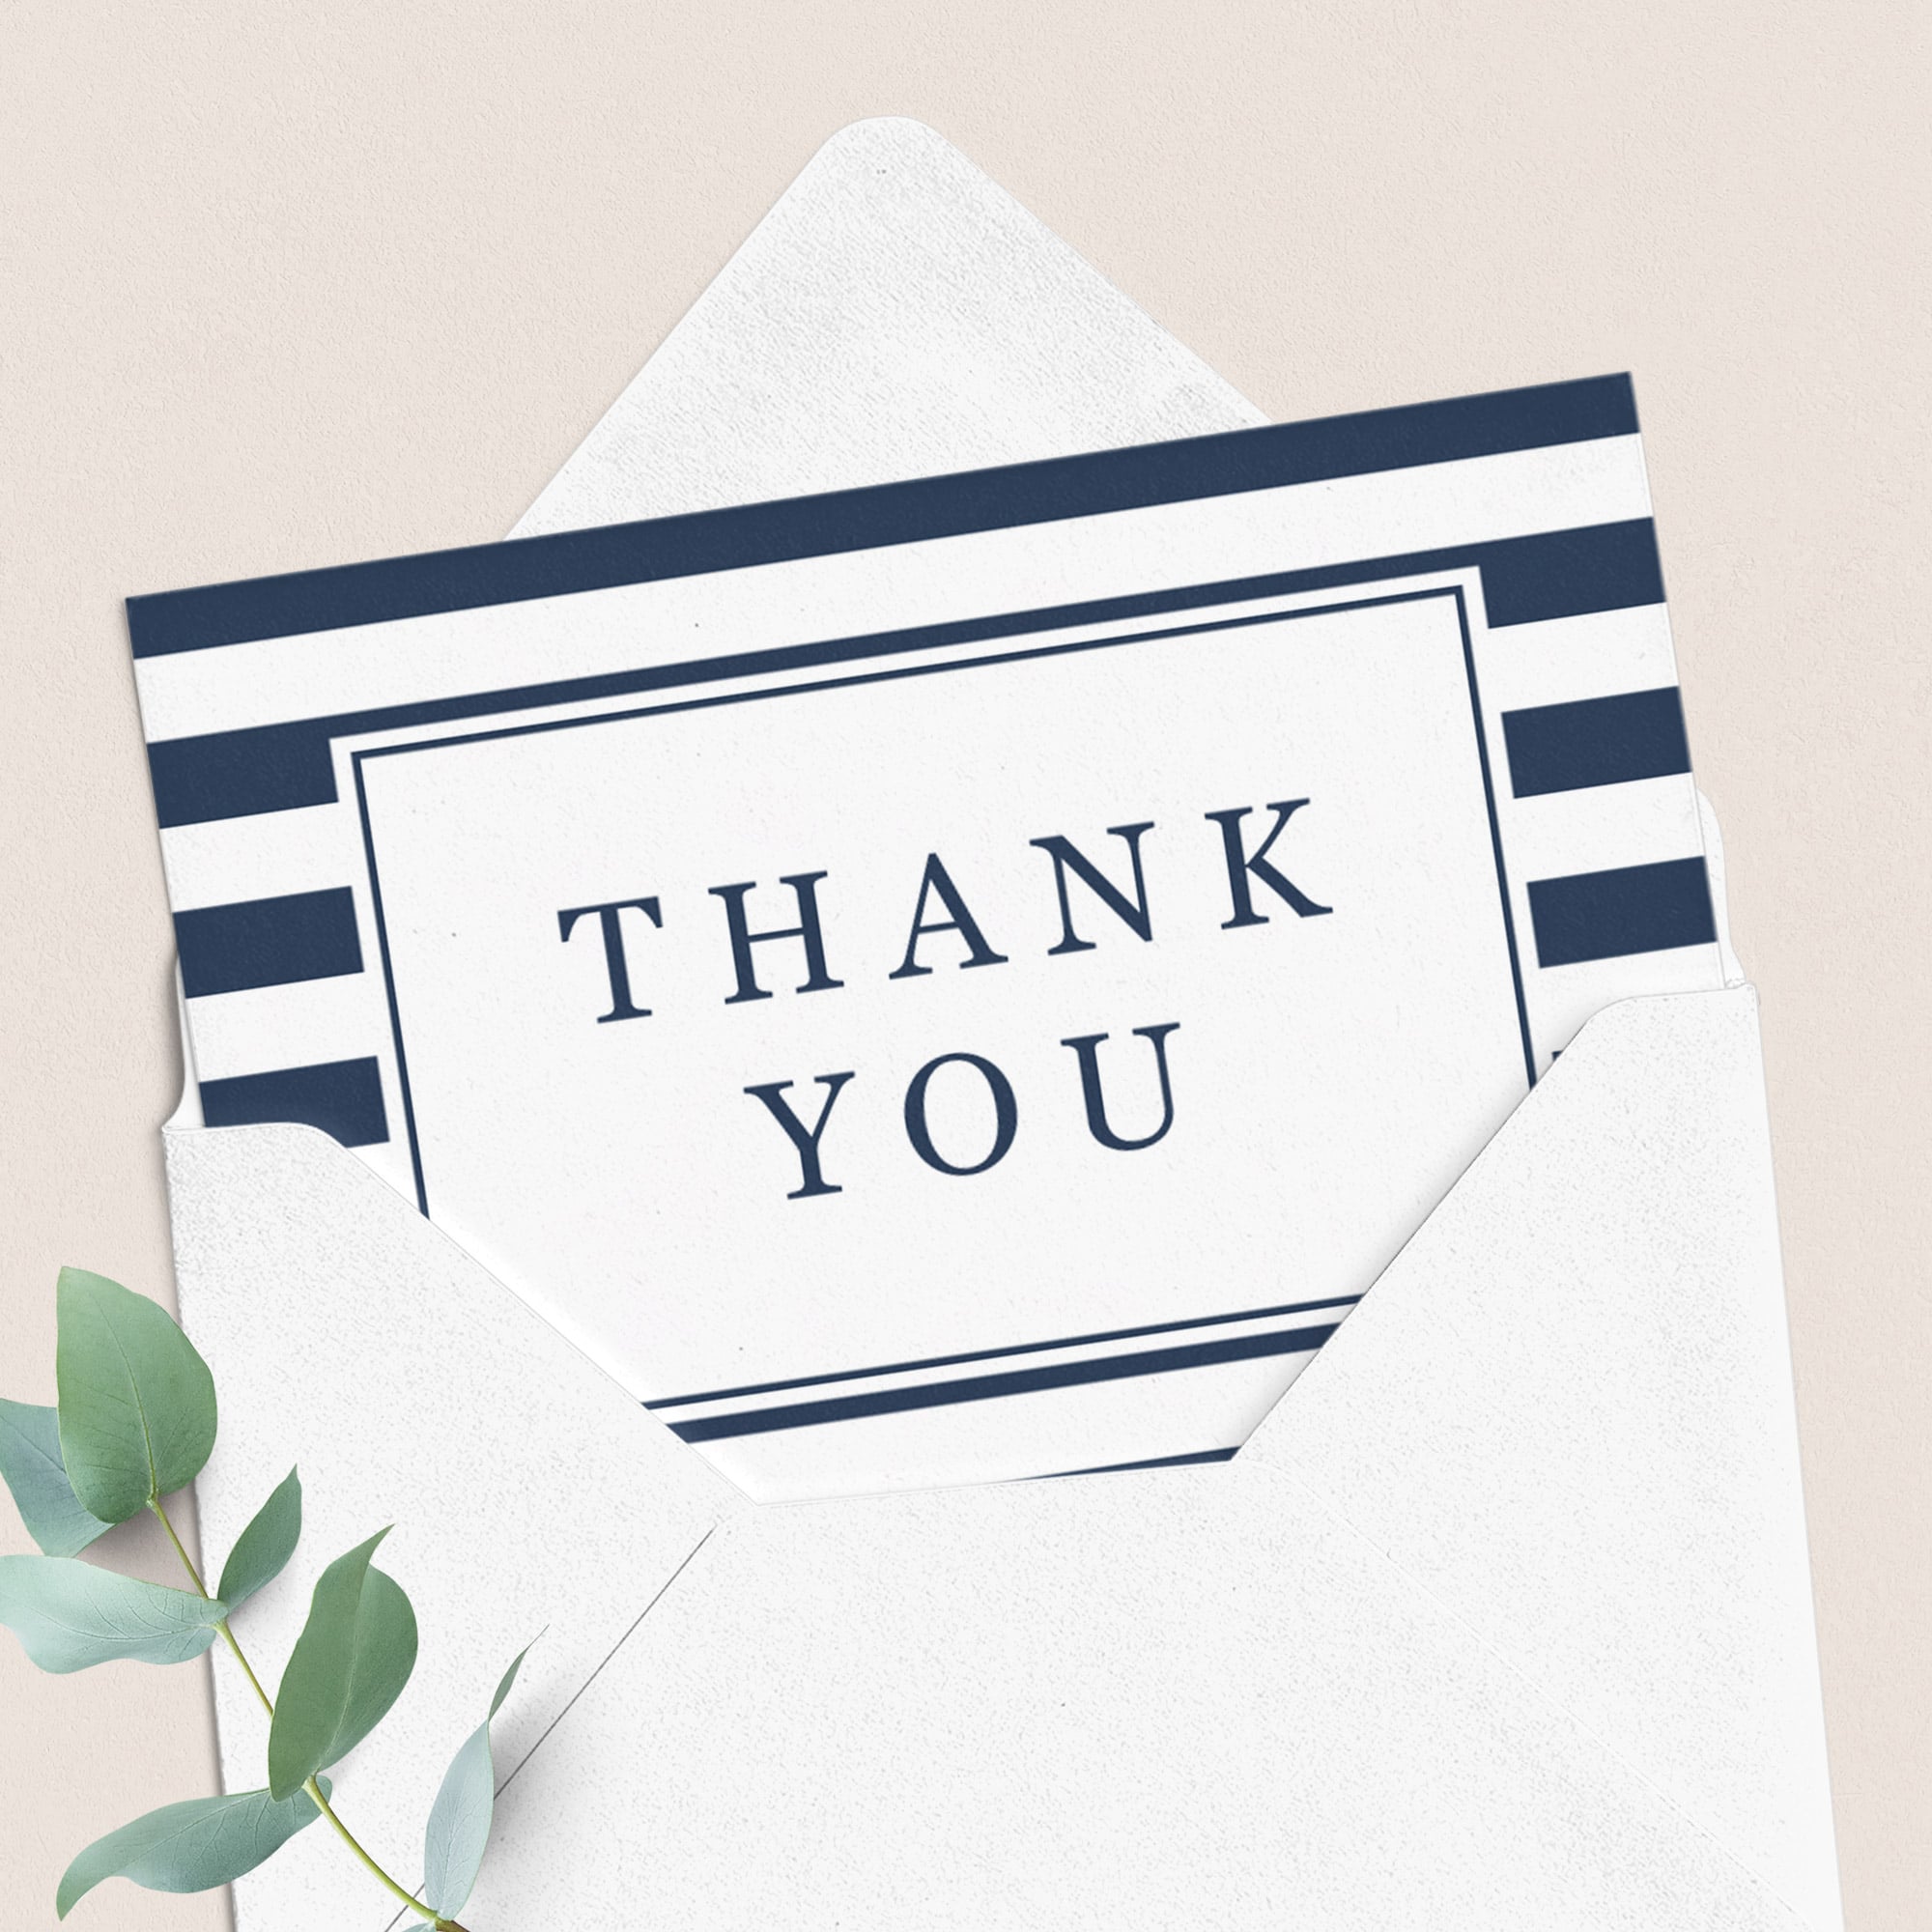 Baby shower thank you cards printable by LittleSizzle